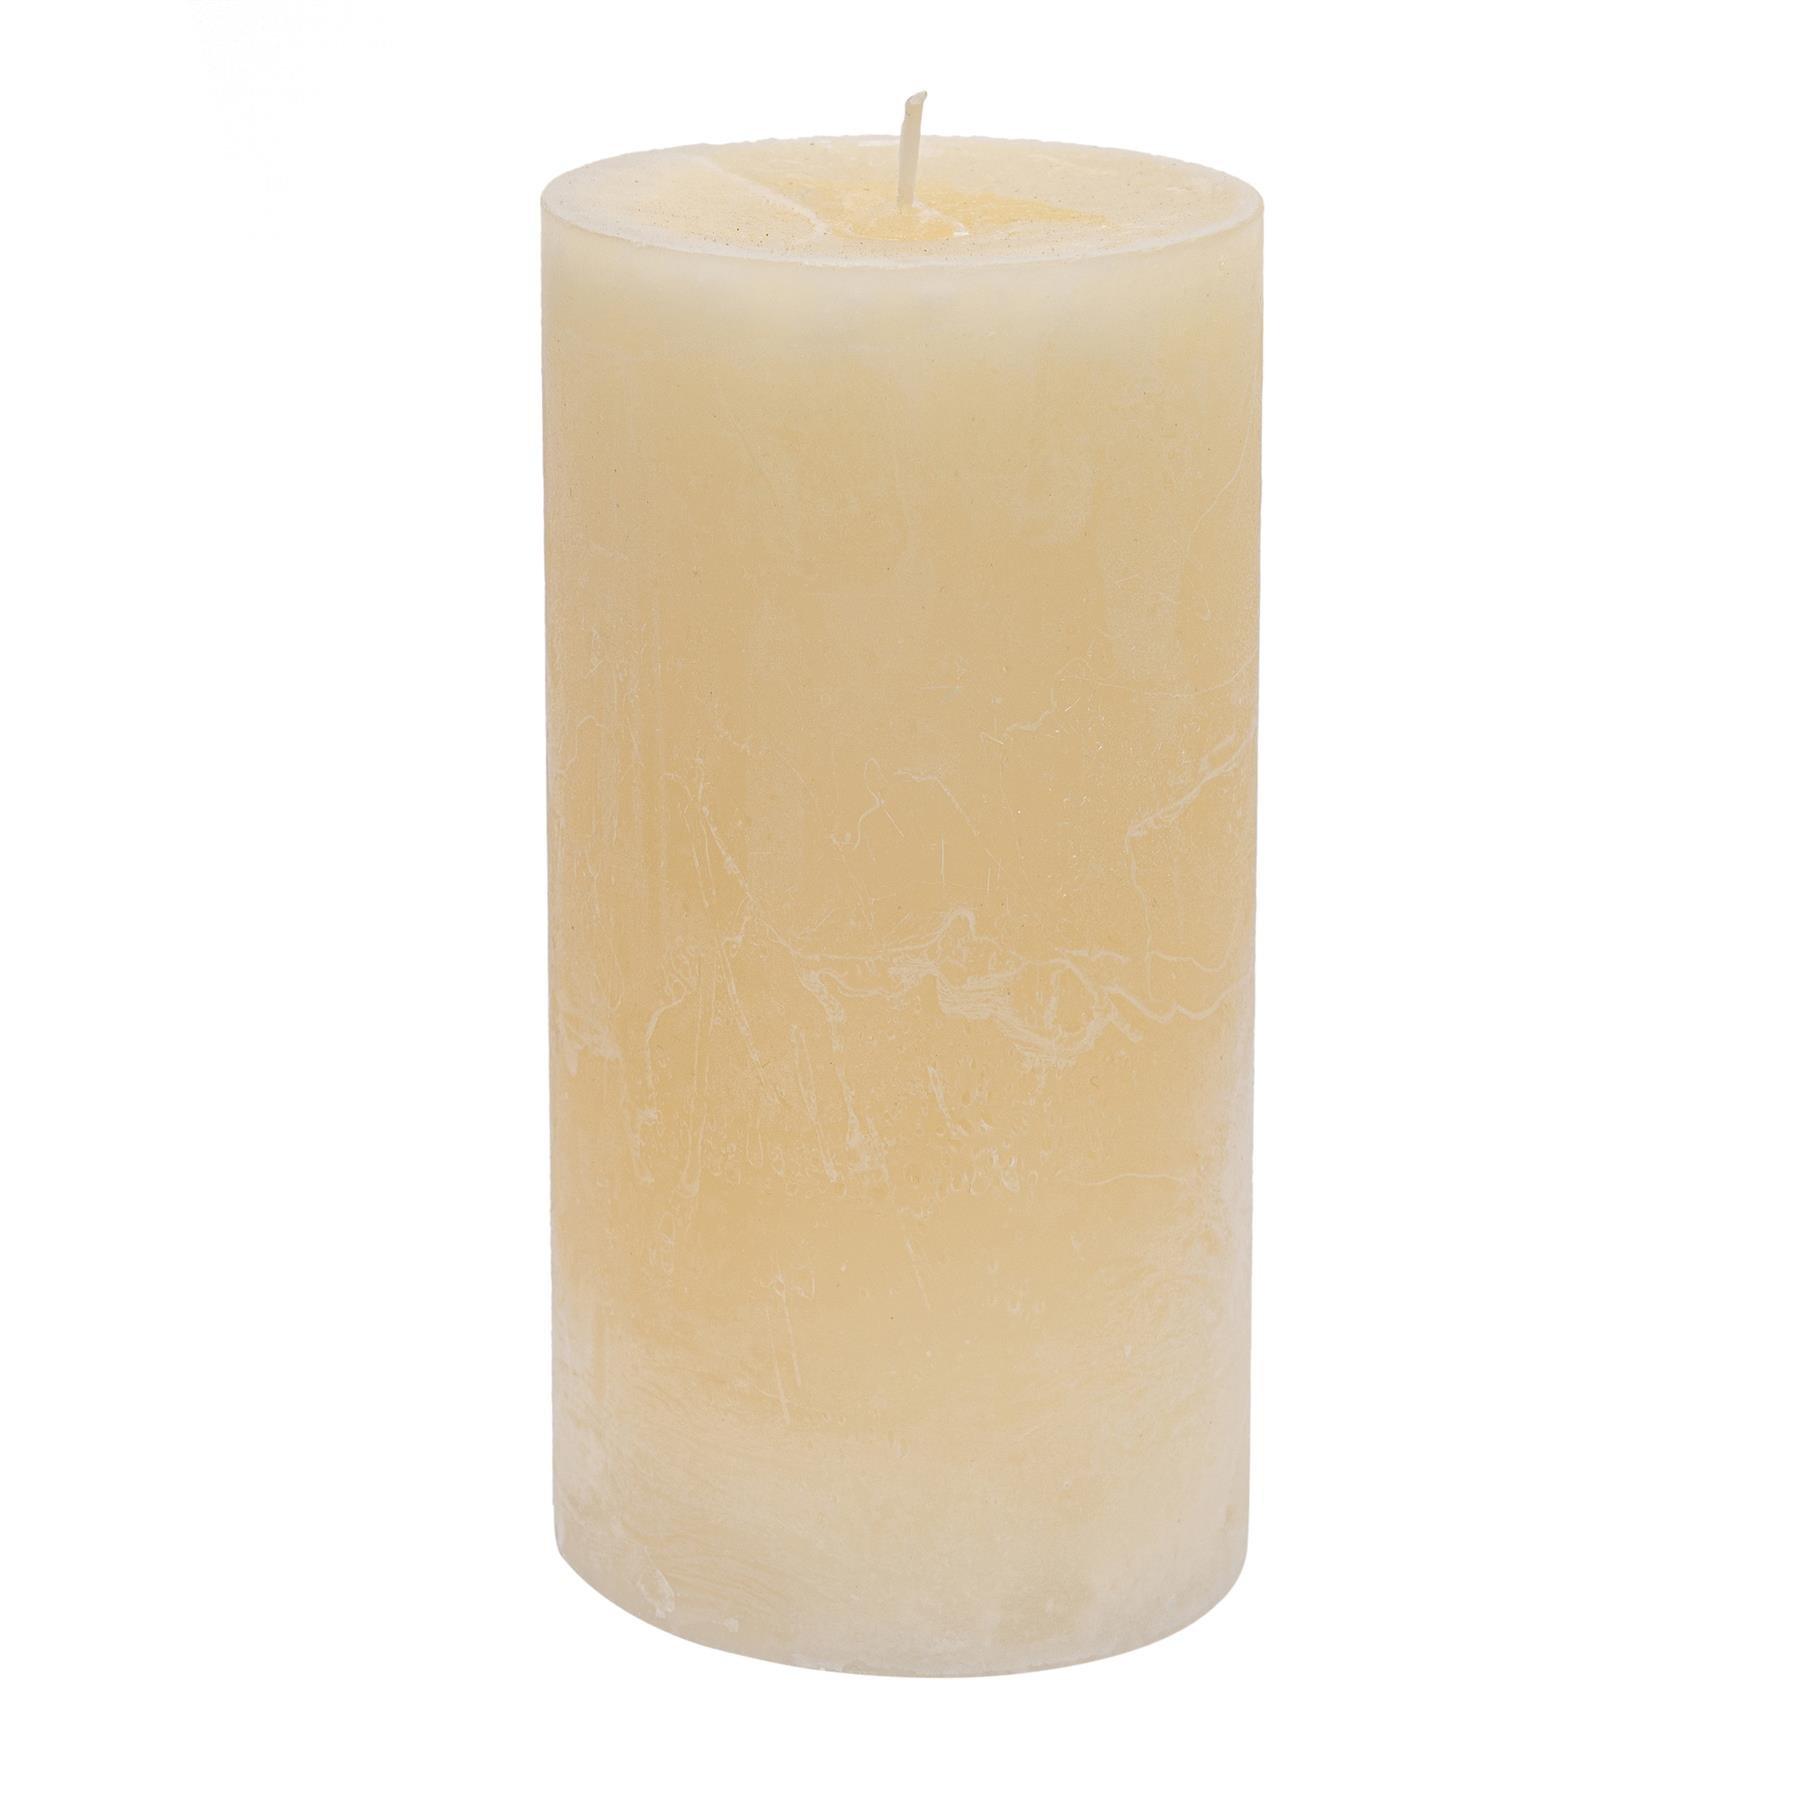 Vanilla Scented Pillar Candle brown